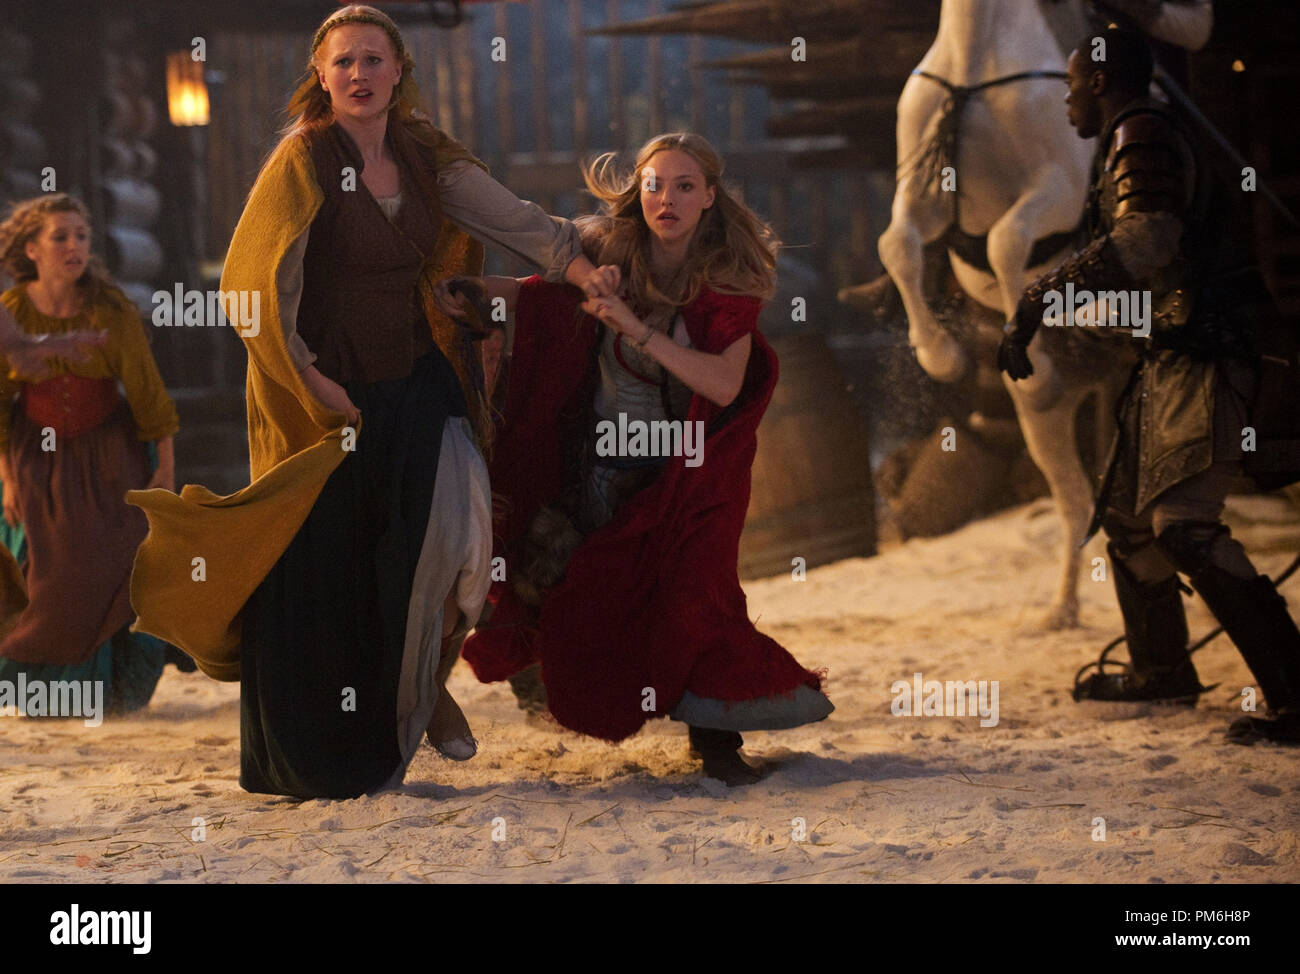 (L-r) SHAUNA KAIN as Roxanne and AMANDA SEYFRIED as Valerie in Warner Bros. Pictures' fantasy thriller 'RED RIDING HOOD,' a Warner Bros. Pictures release. Stock Photo